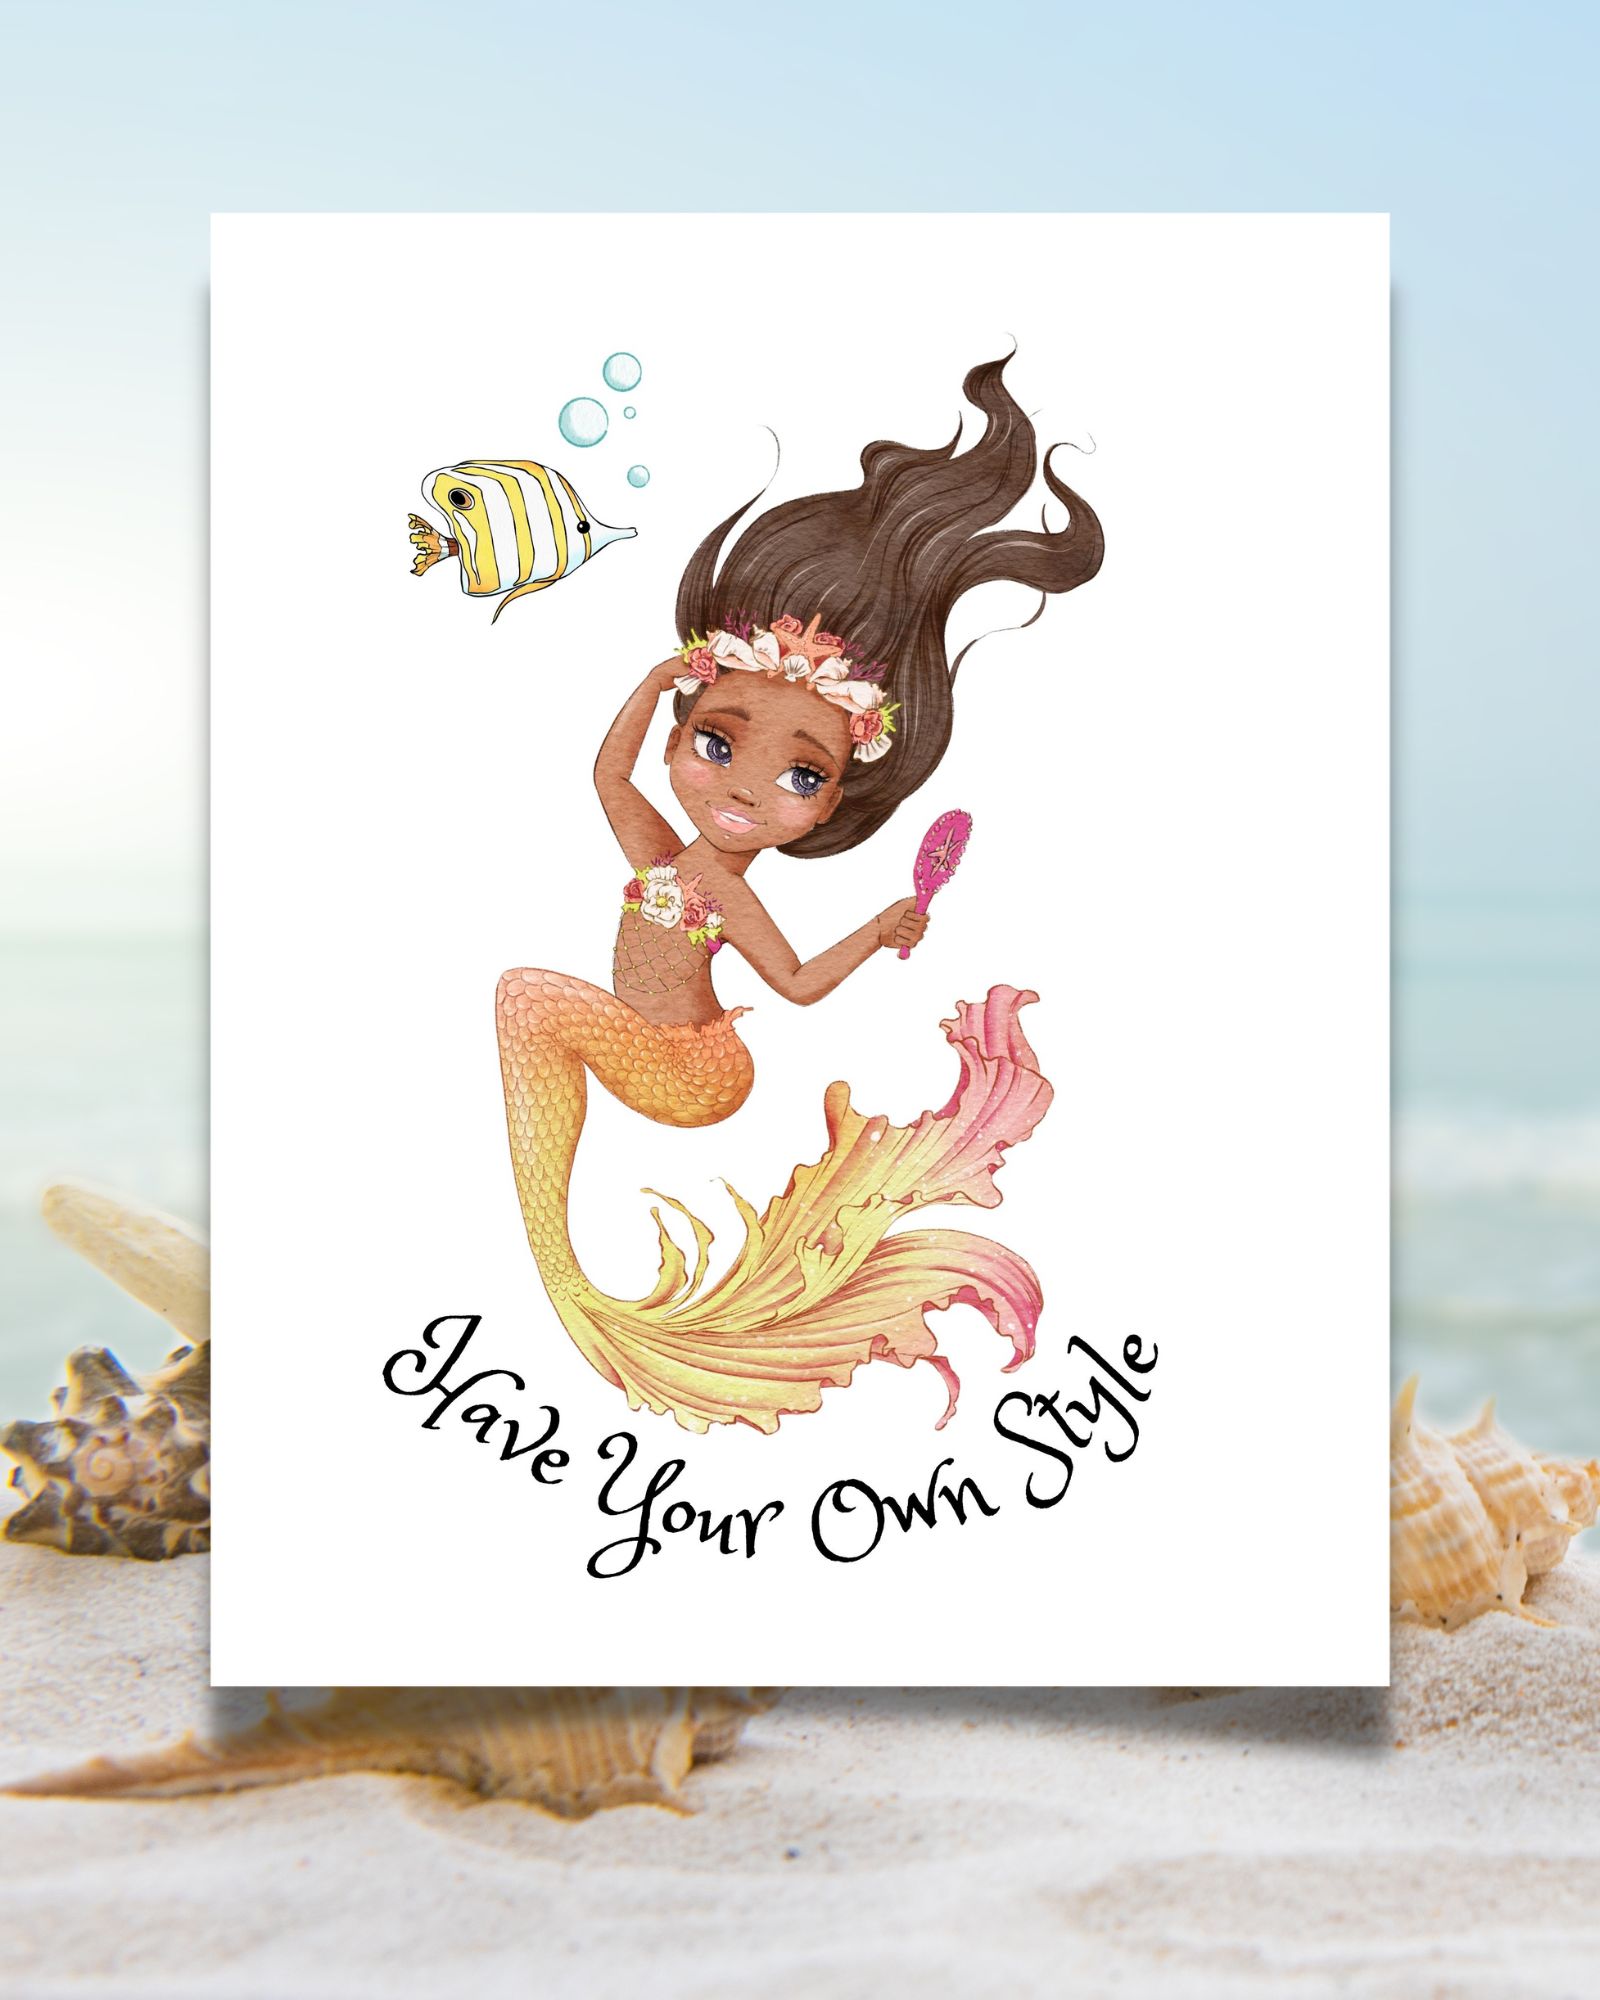 Have Your Own Style Mermaid Poster